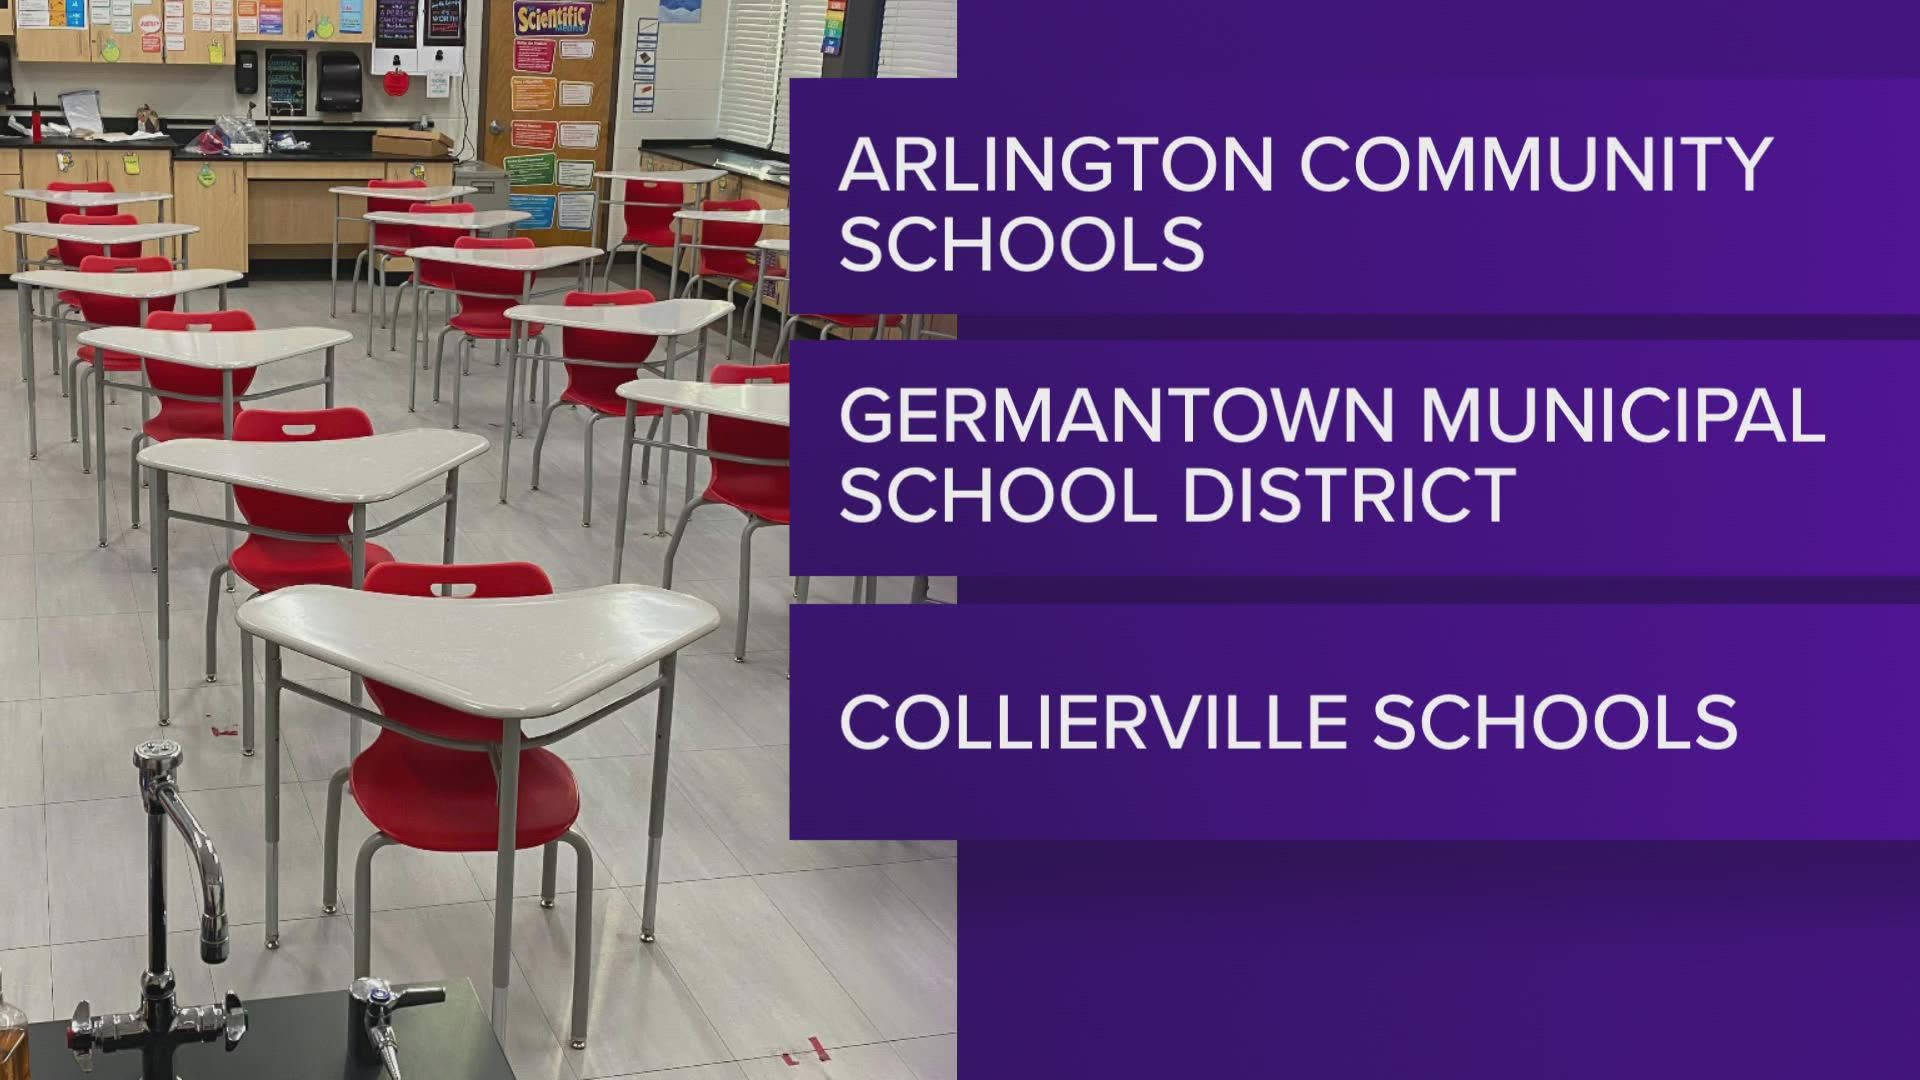 Collierville, Germantown, and Arlington each made the ranking for the top 10 best school districts in the state.